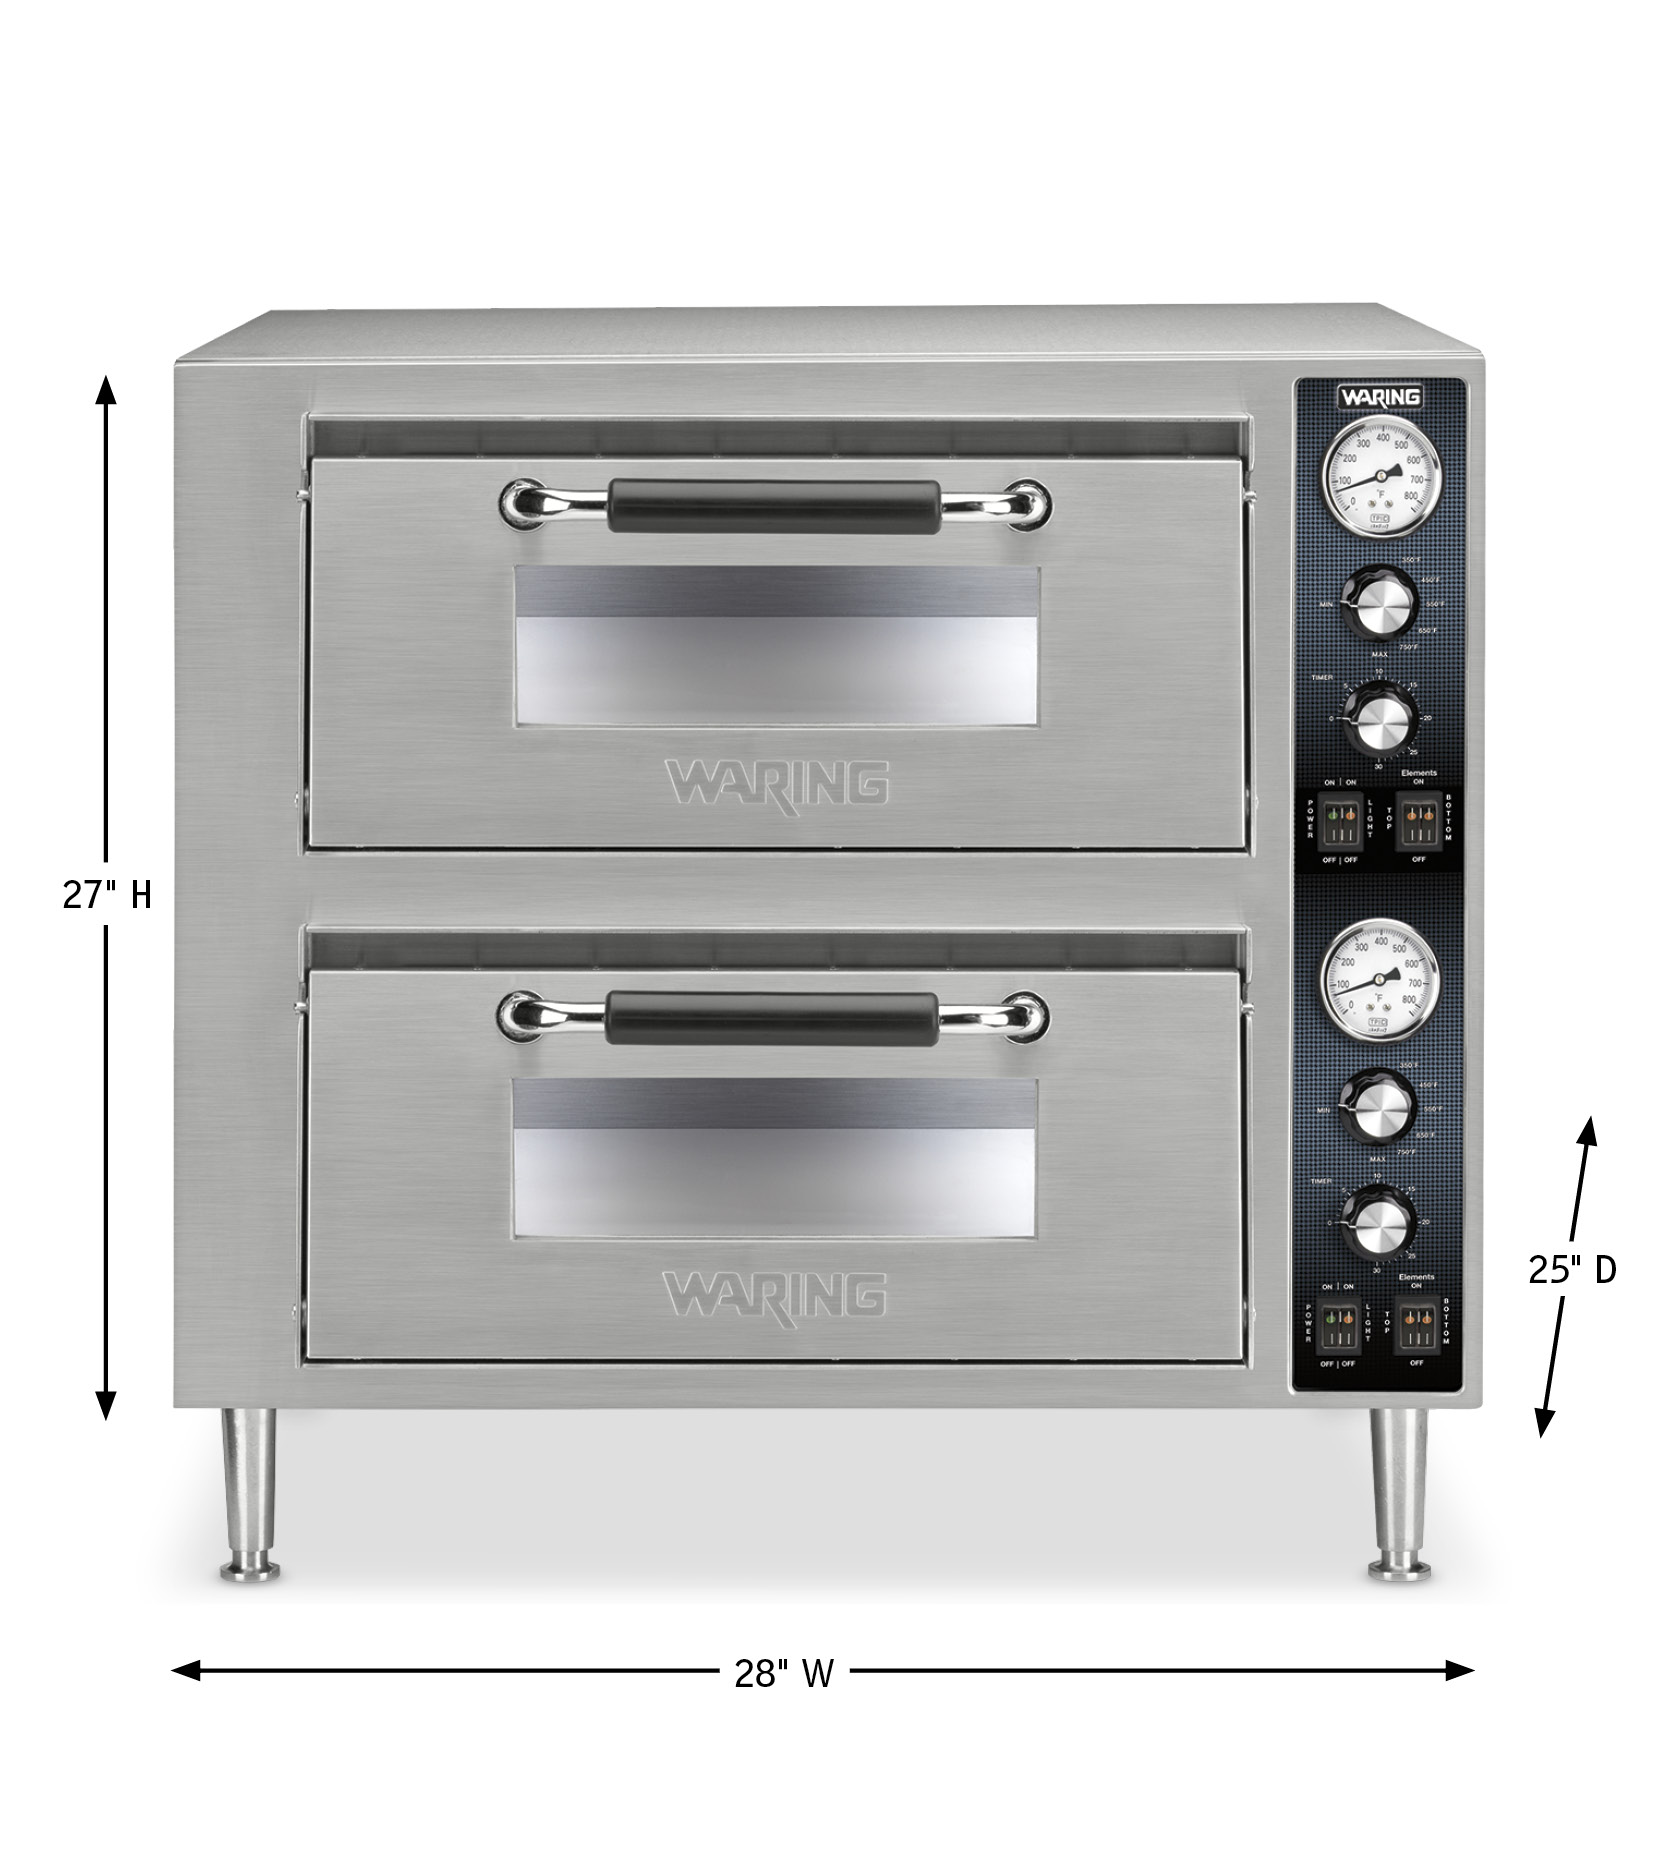 https://www.waringcommercialproducts.com/files/products/wpo750-waring-pizza-oven-spec.jpg